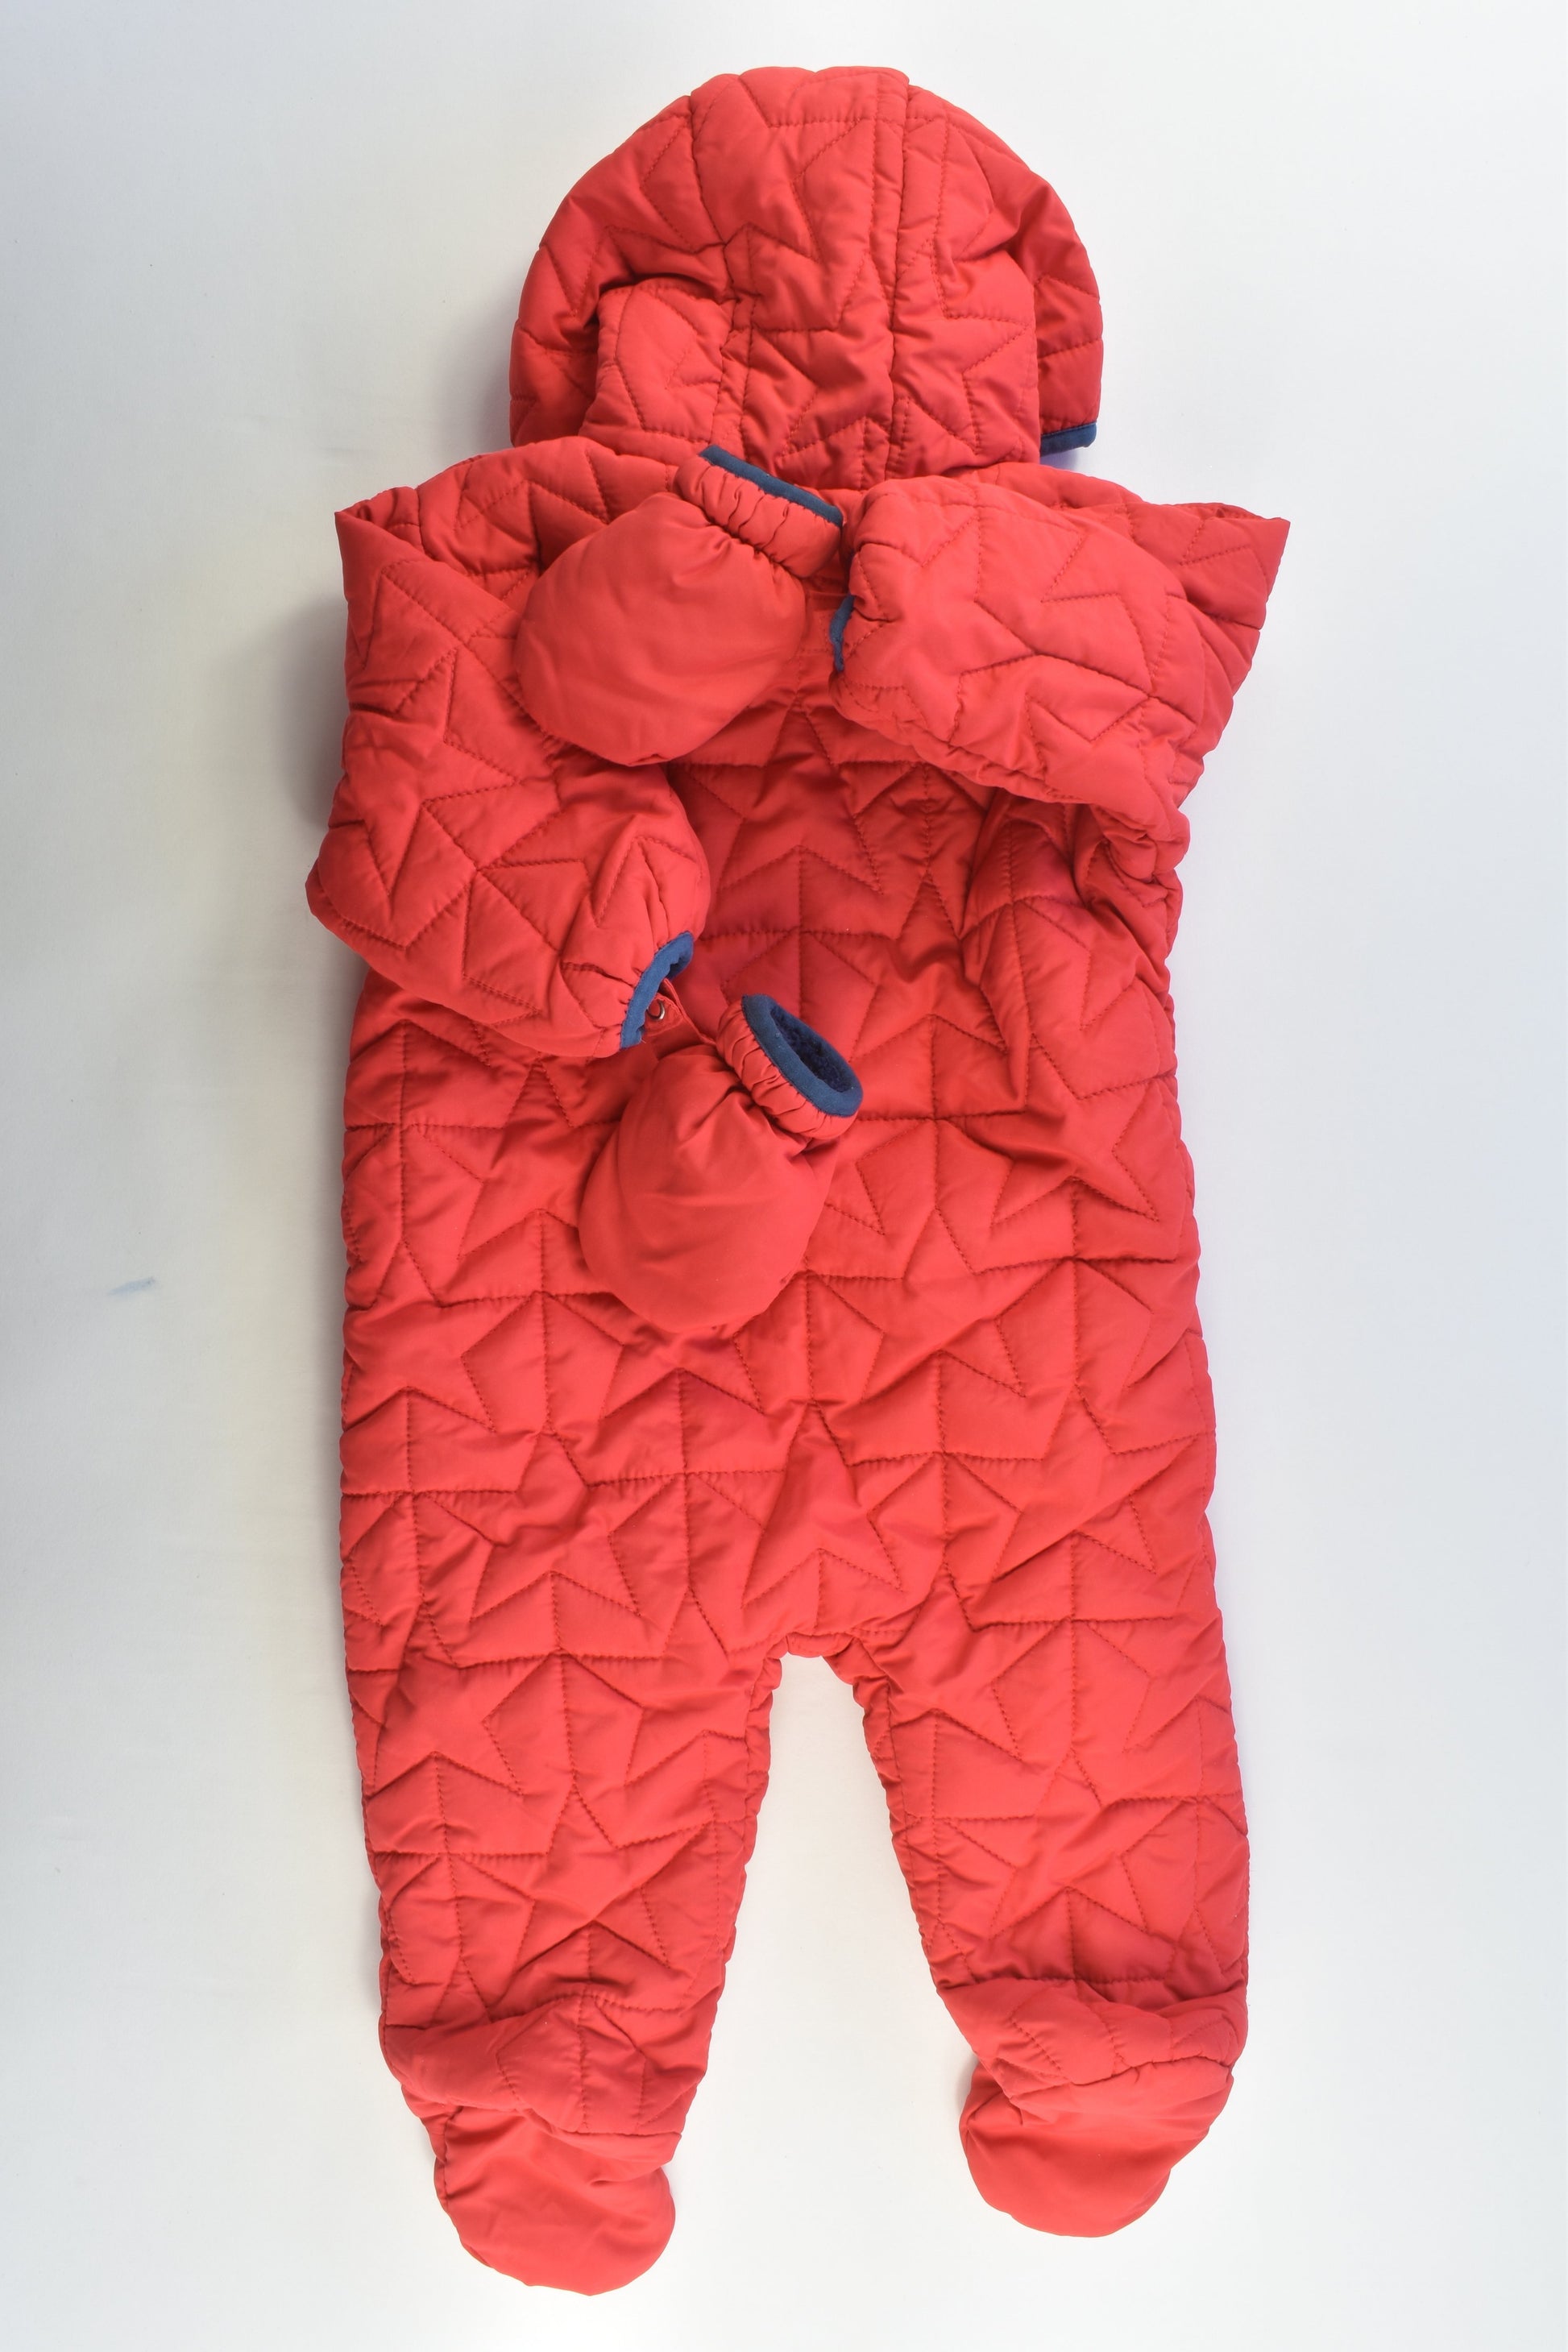 NEW Next (UK) Size 6-9 months (0-1) Stars Outdoors Overalls/ Pramsuit